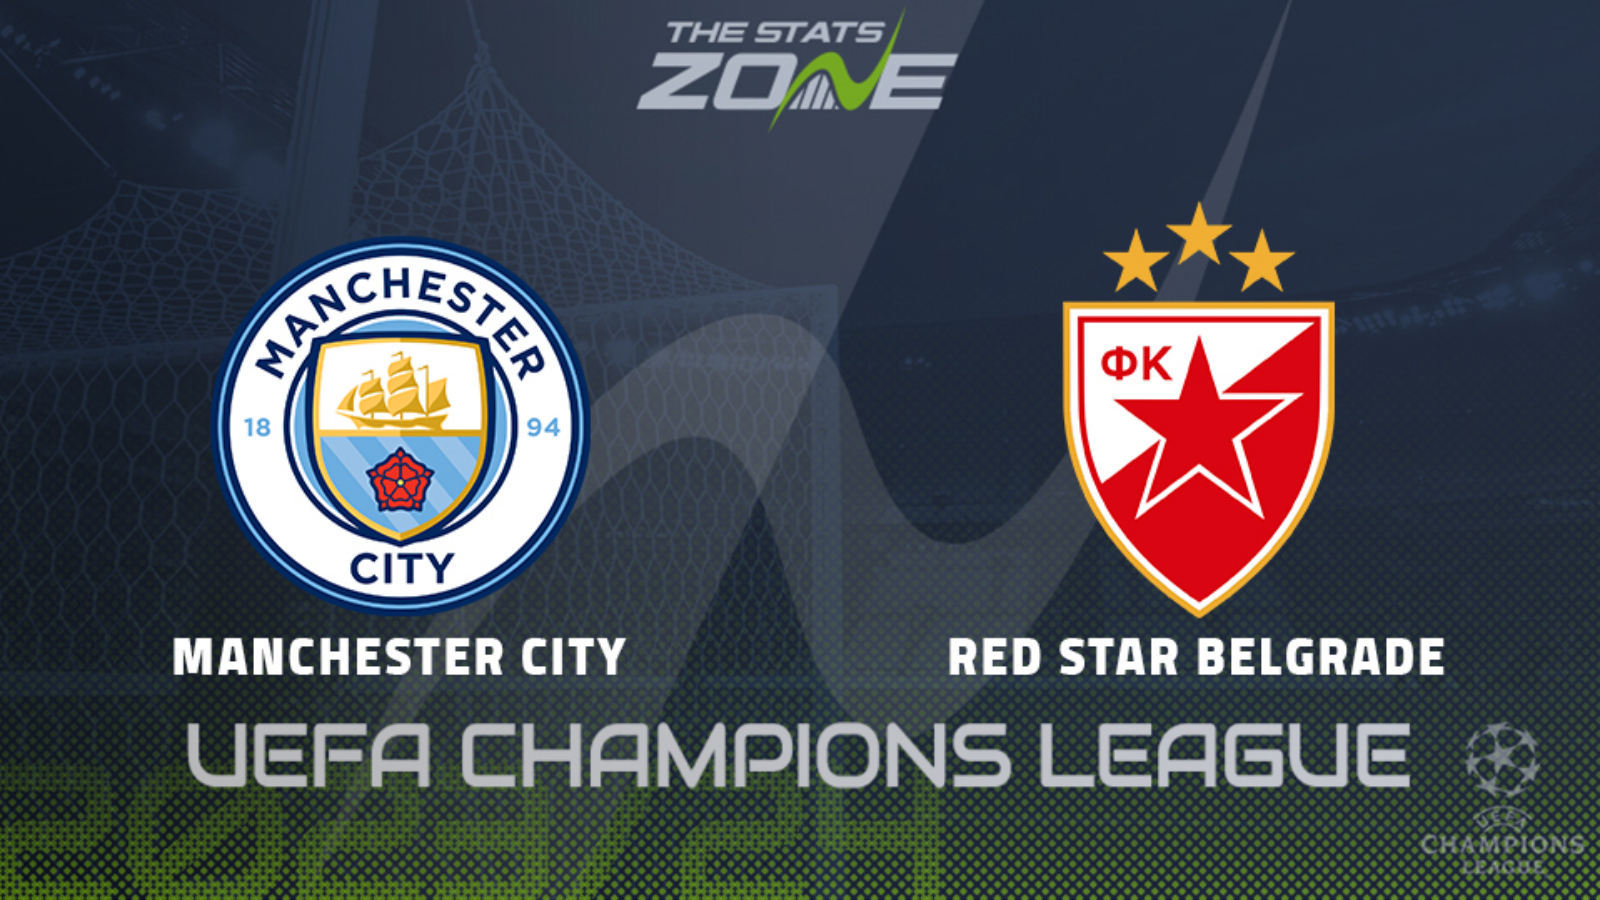 Why are Red Star Belgrade also called Crvena Zvezda? Taking a closer look  at Manchester City's Champions League opponents